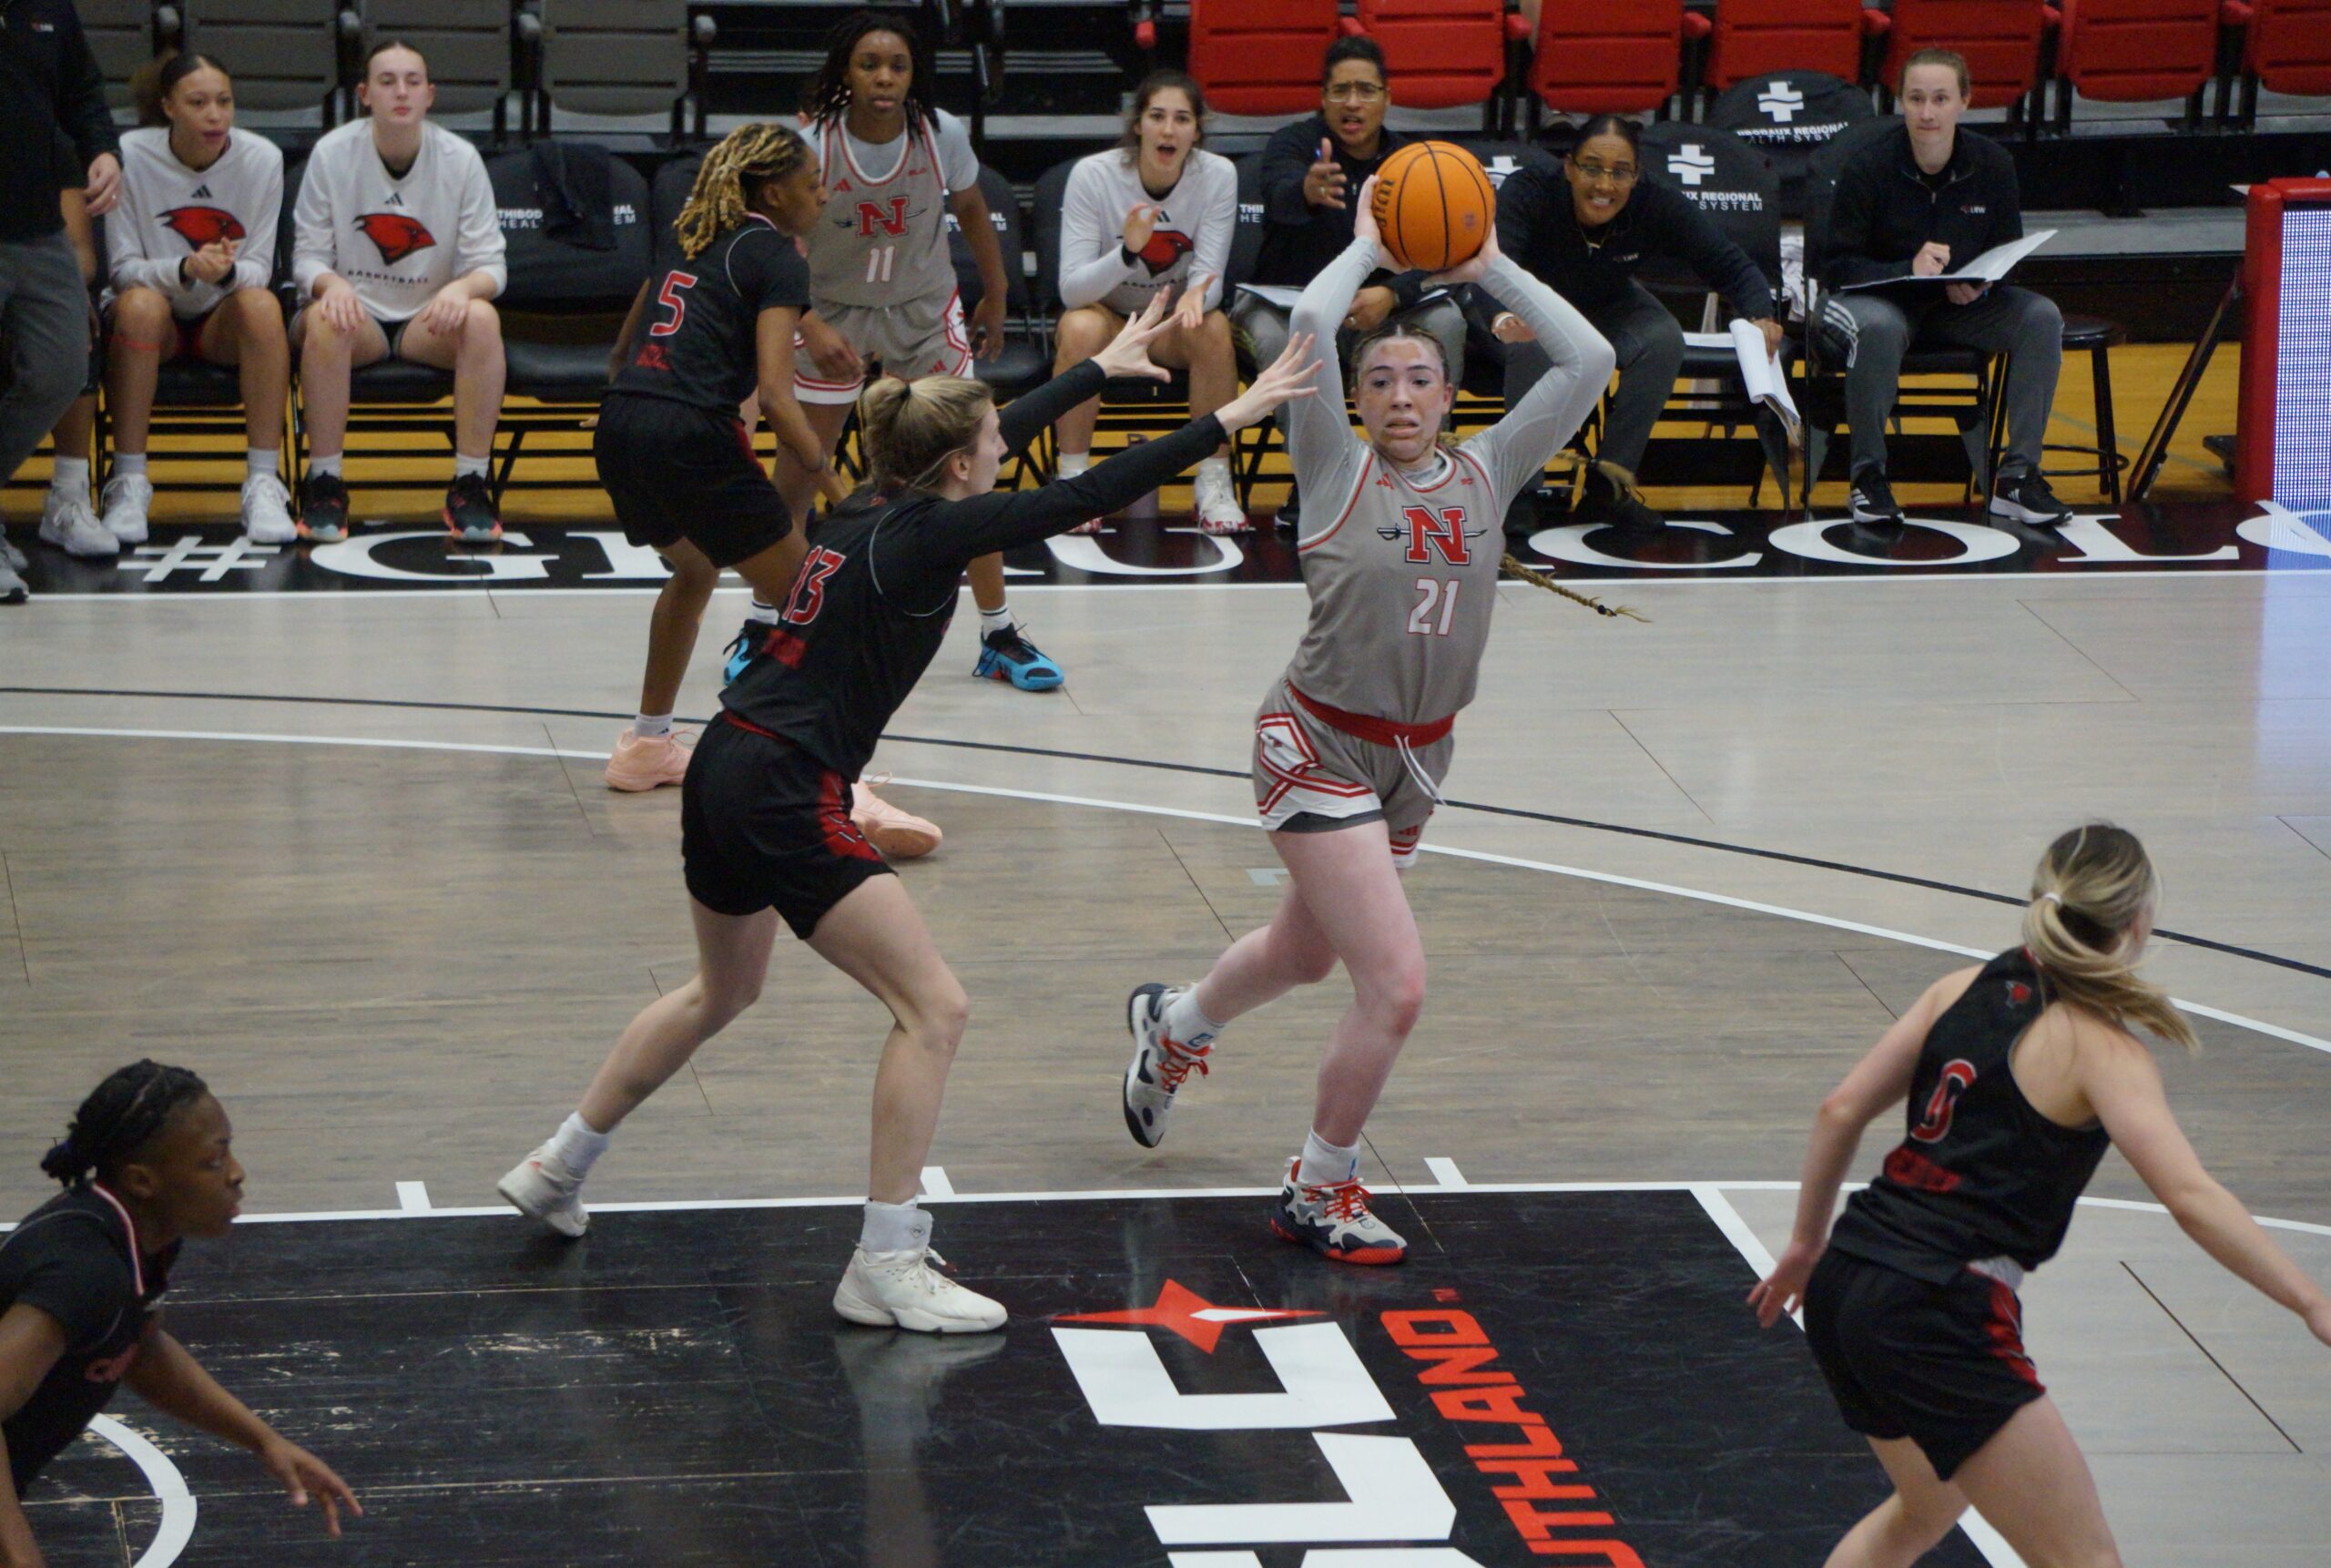 Thumbnail for Late rally couldn’t overcome poor shooting as Nicholls falls to Lady Demons